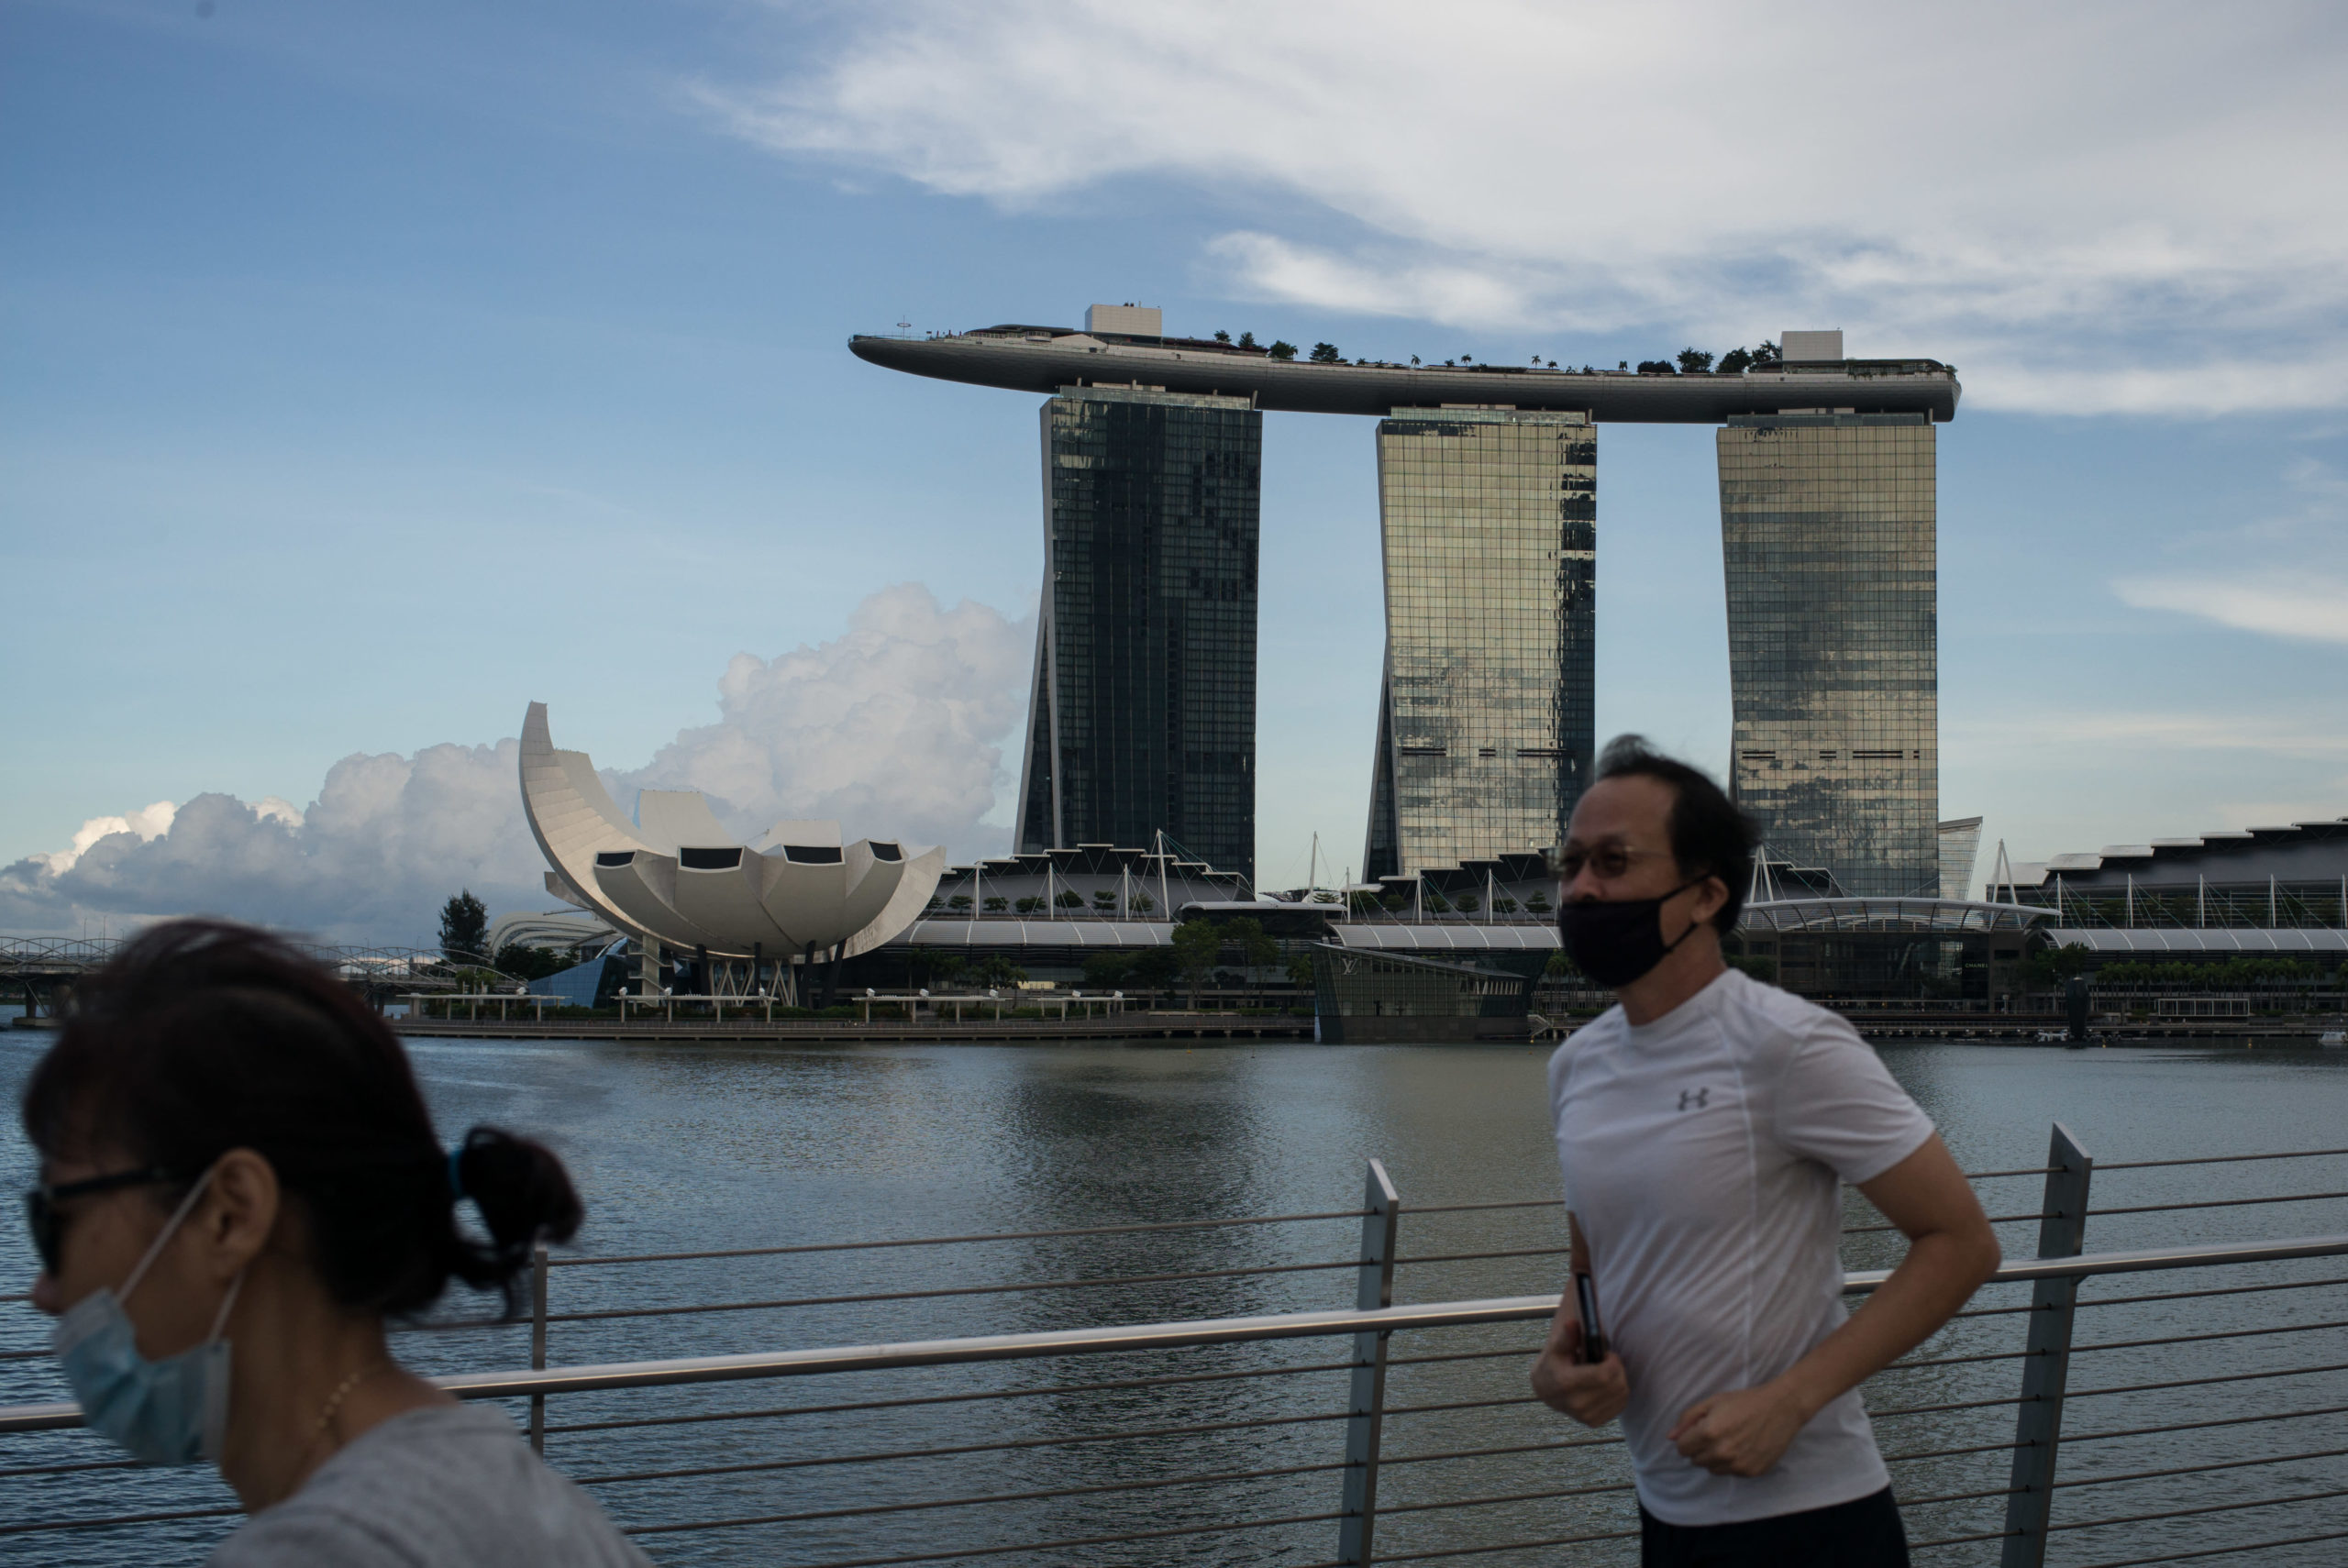 Singapore turns to home tourism as journey sector reels from coronavirus